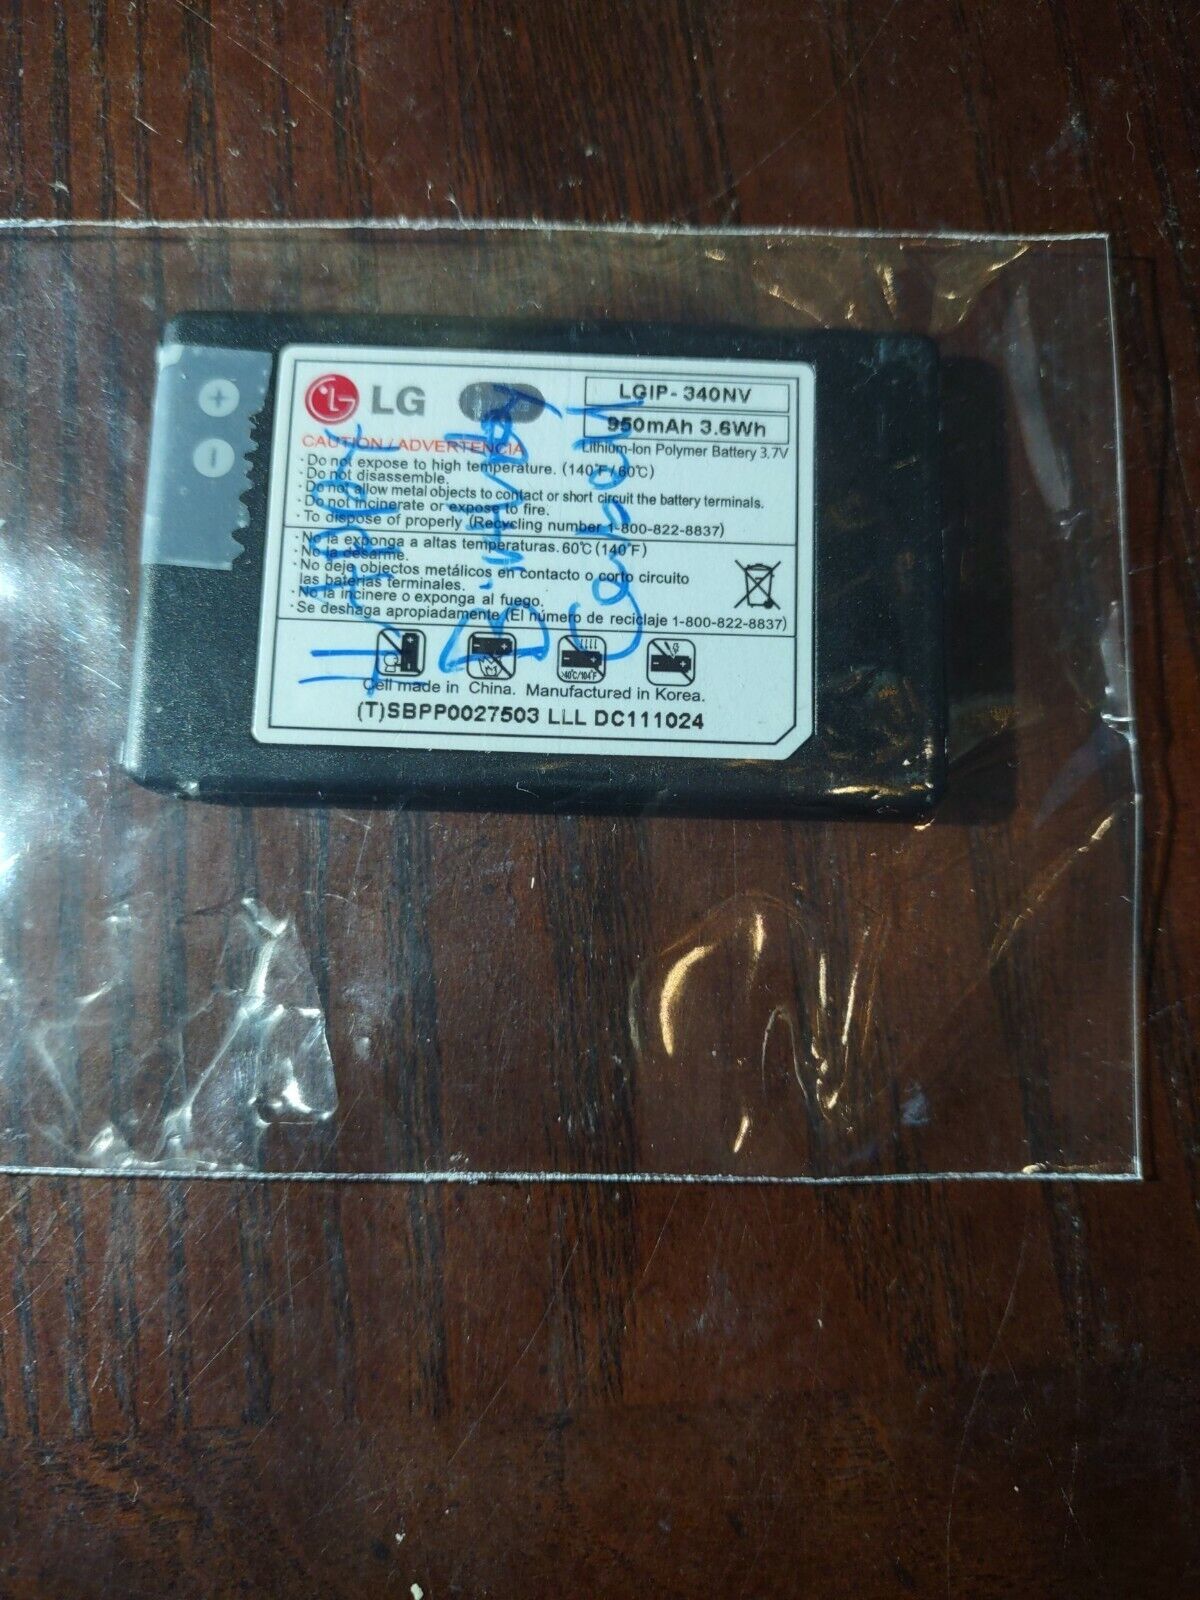 Primary image for LG LGIP-340NV Battery